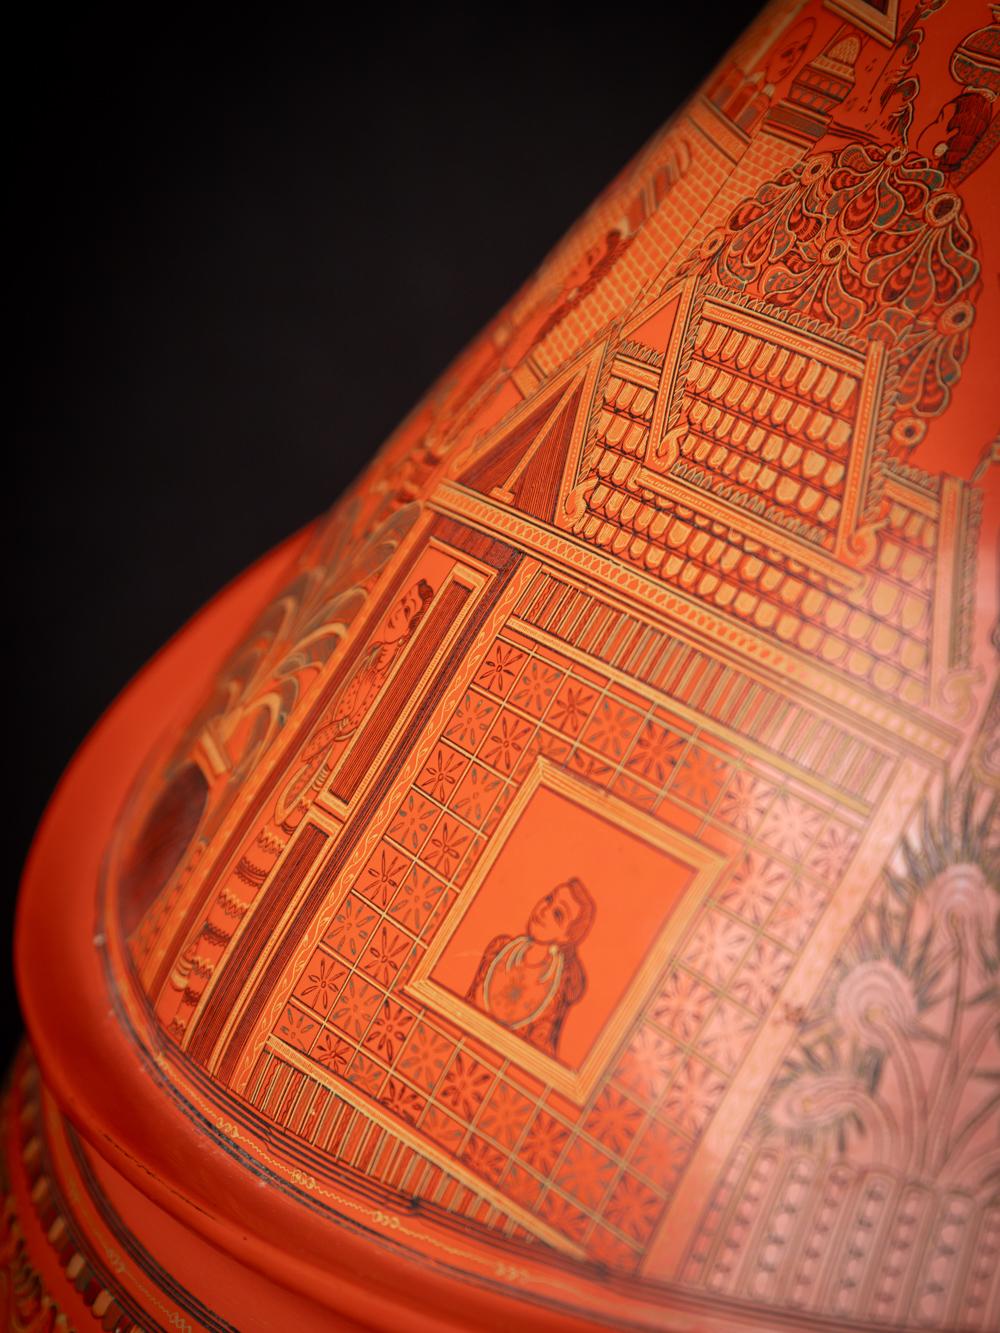 This antique lacquerware Burmese offering vessel is a truly unique and special collectible piece. Standing at 46 cm high and with a diameter of 58 cm, it is made of lacquerware and it weighs 3.8kgs. This statue is believed to originate from Burma,